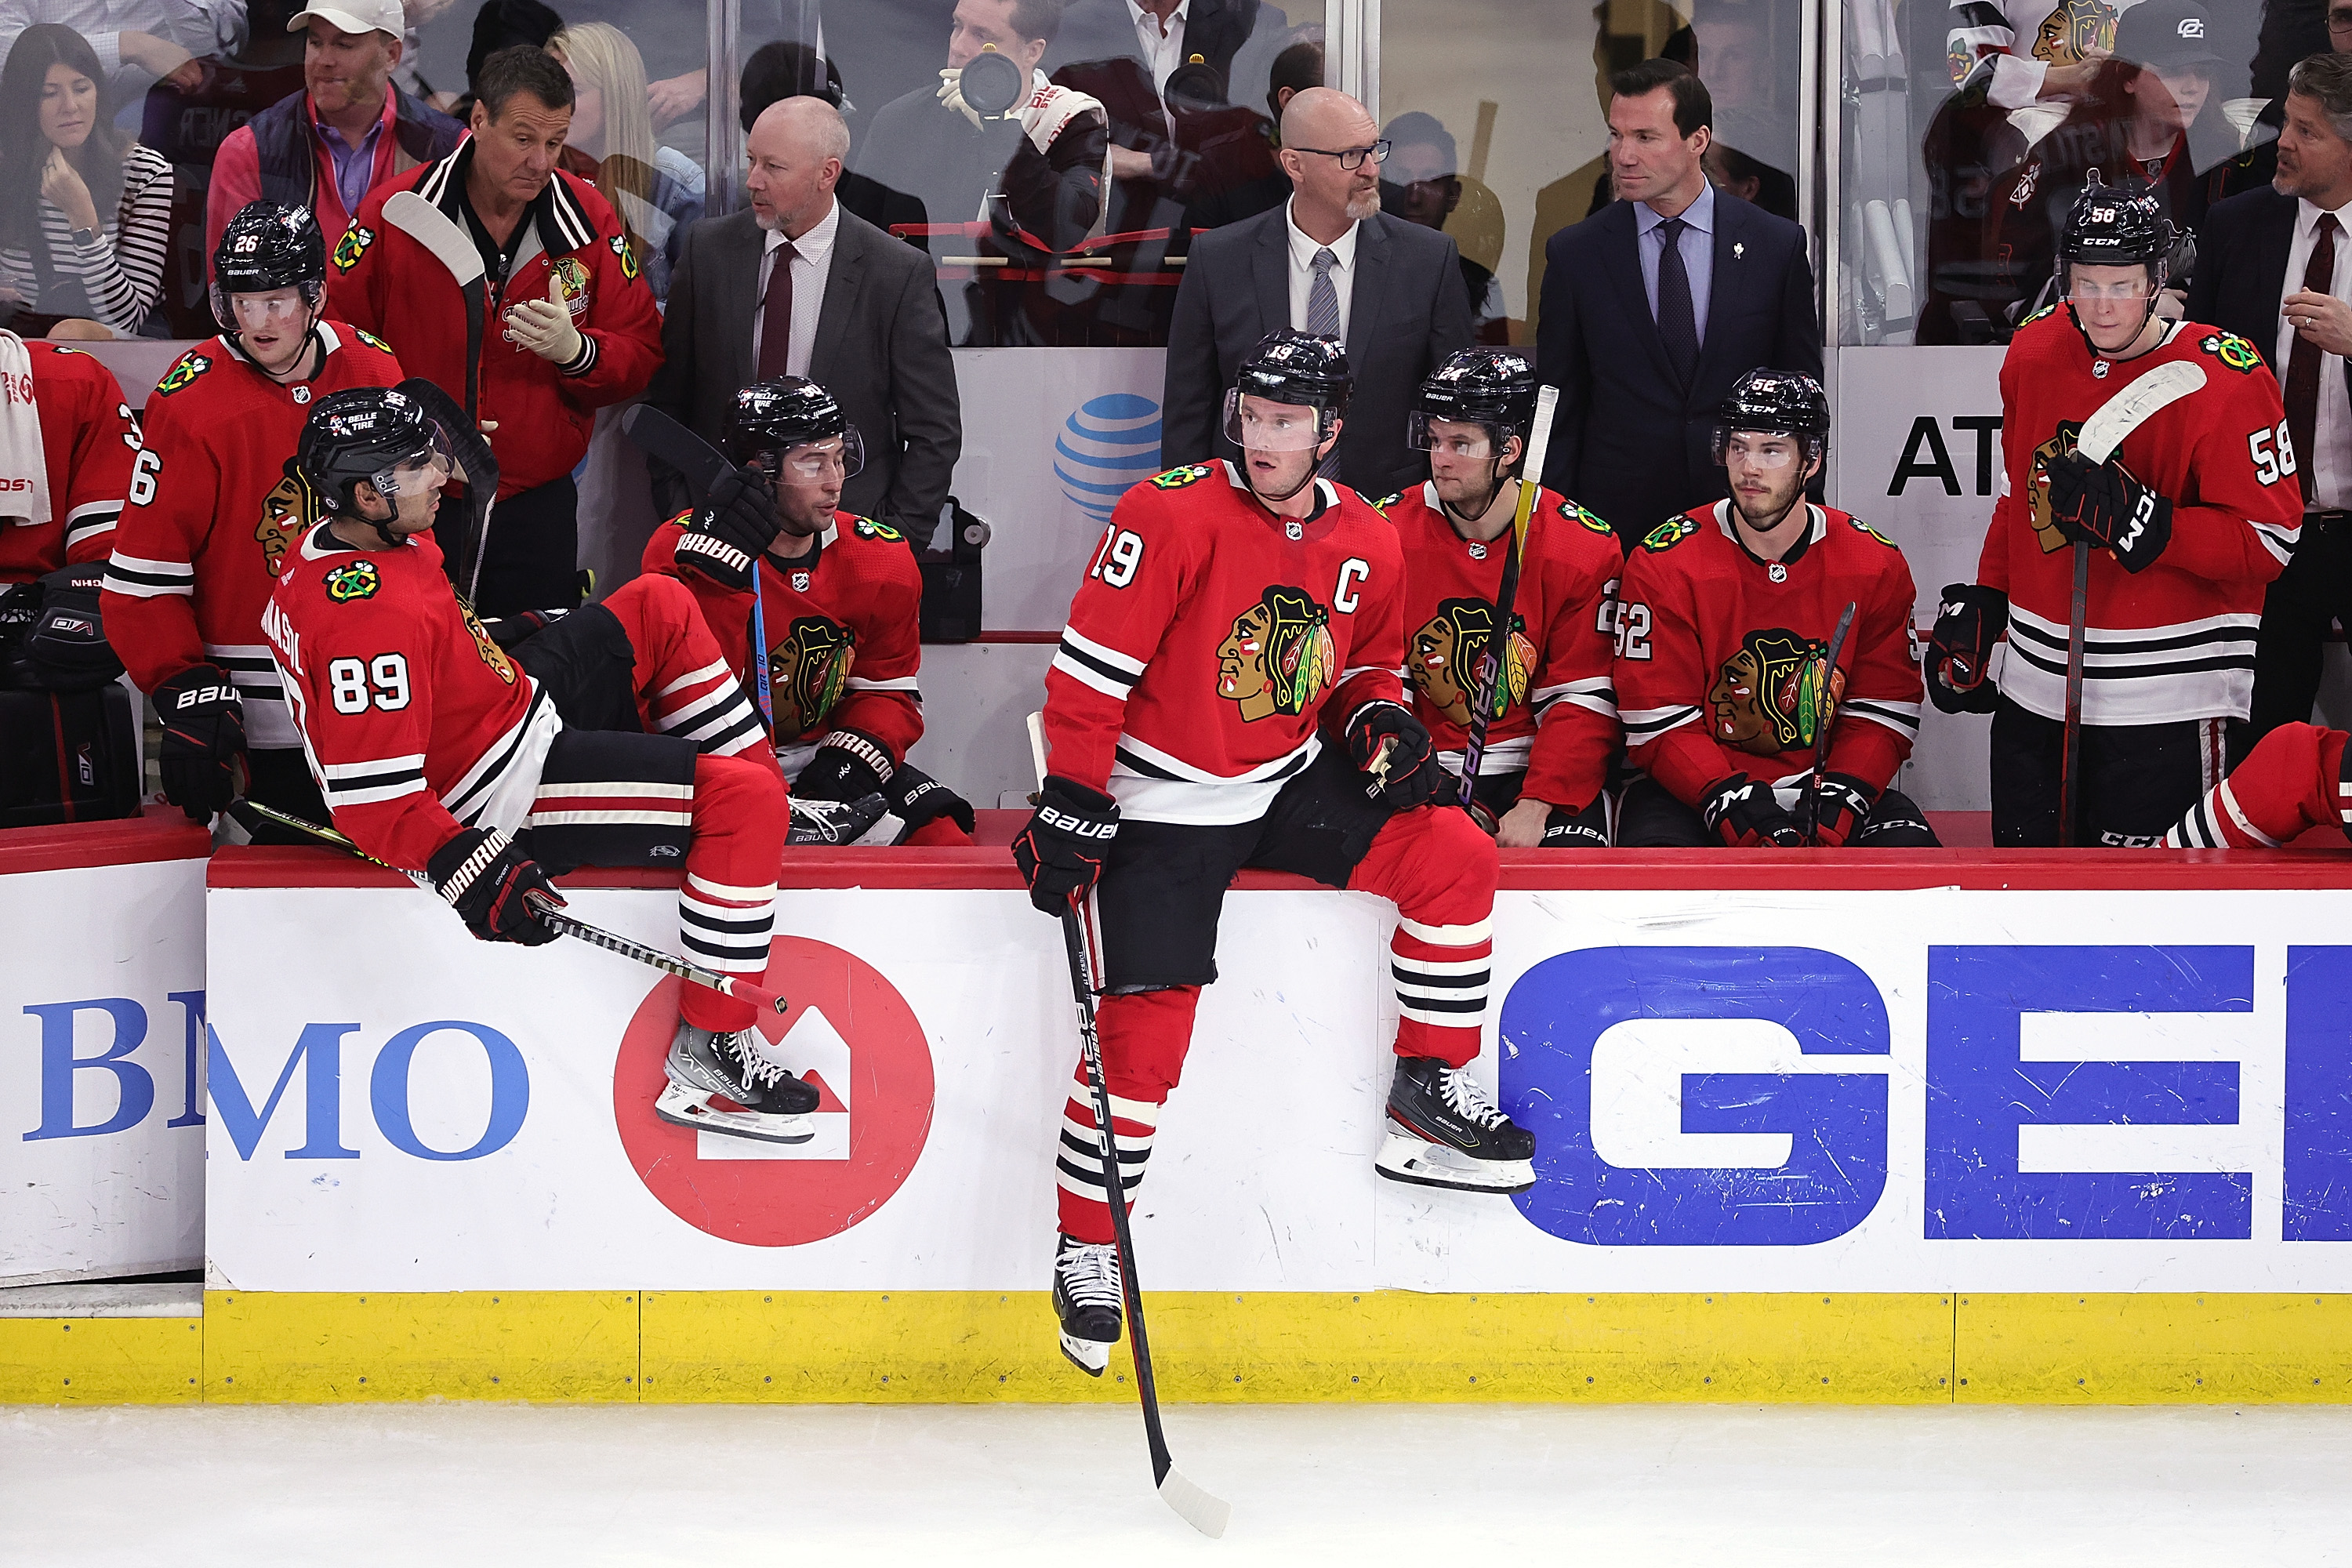 Might the rebuilding Blackhawks be good trade partners for the cap-strapped Bruins?